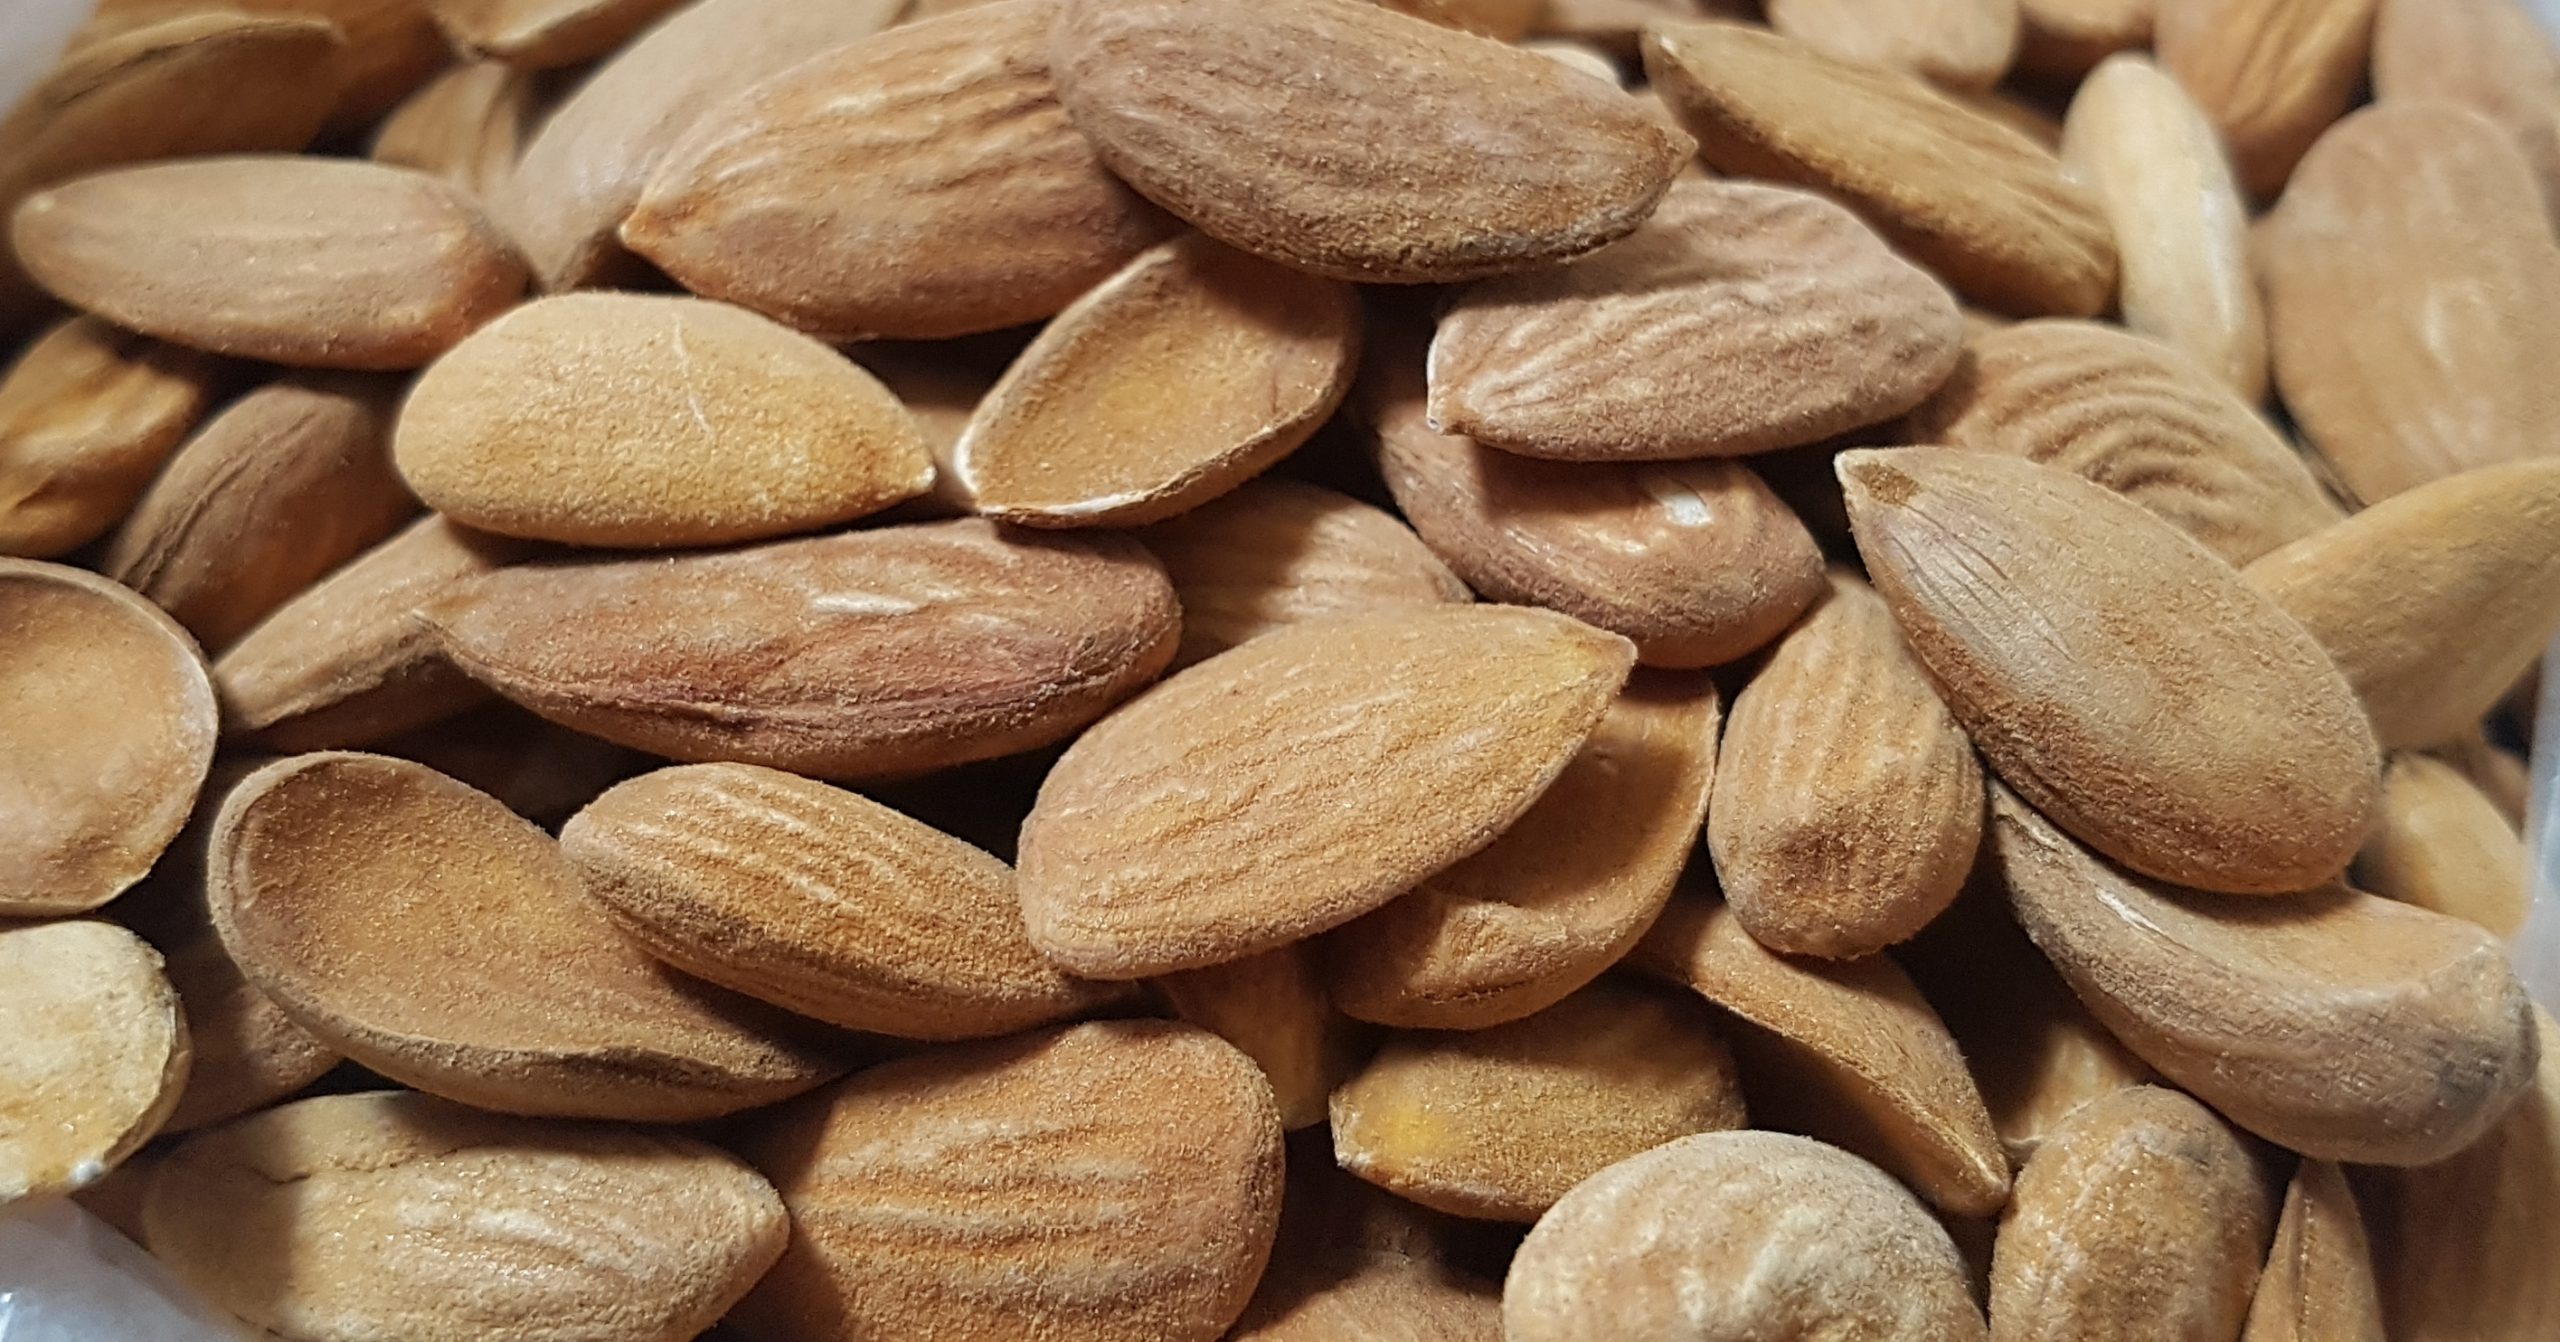 The price of Iranian almond kernels for export